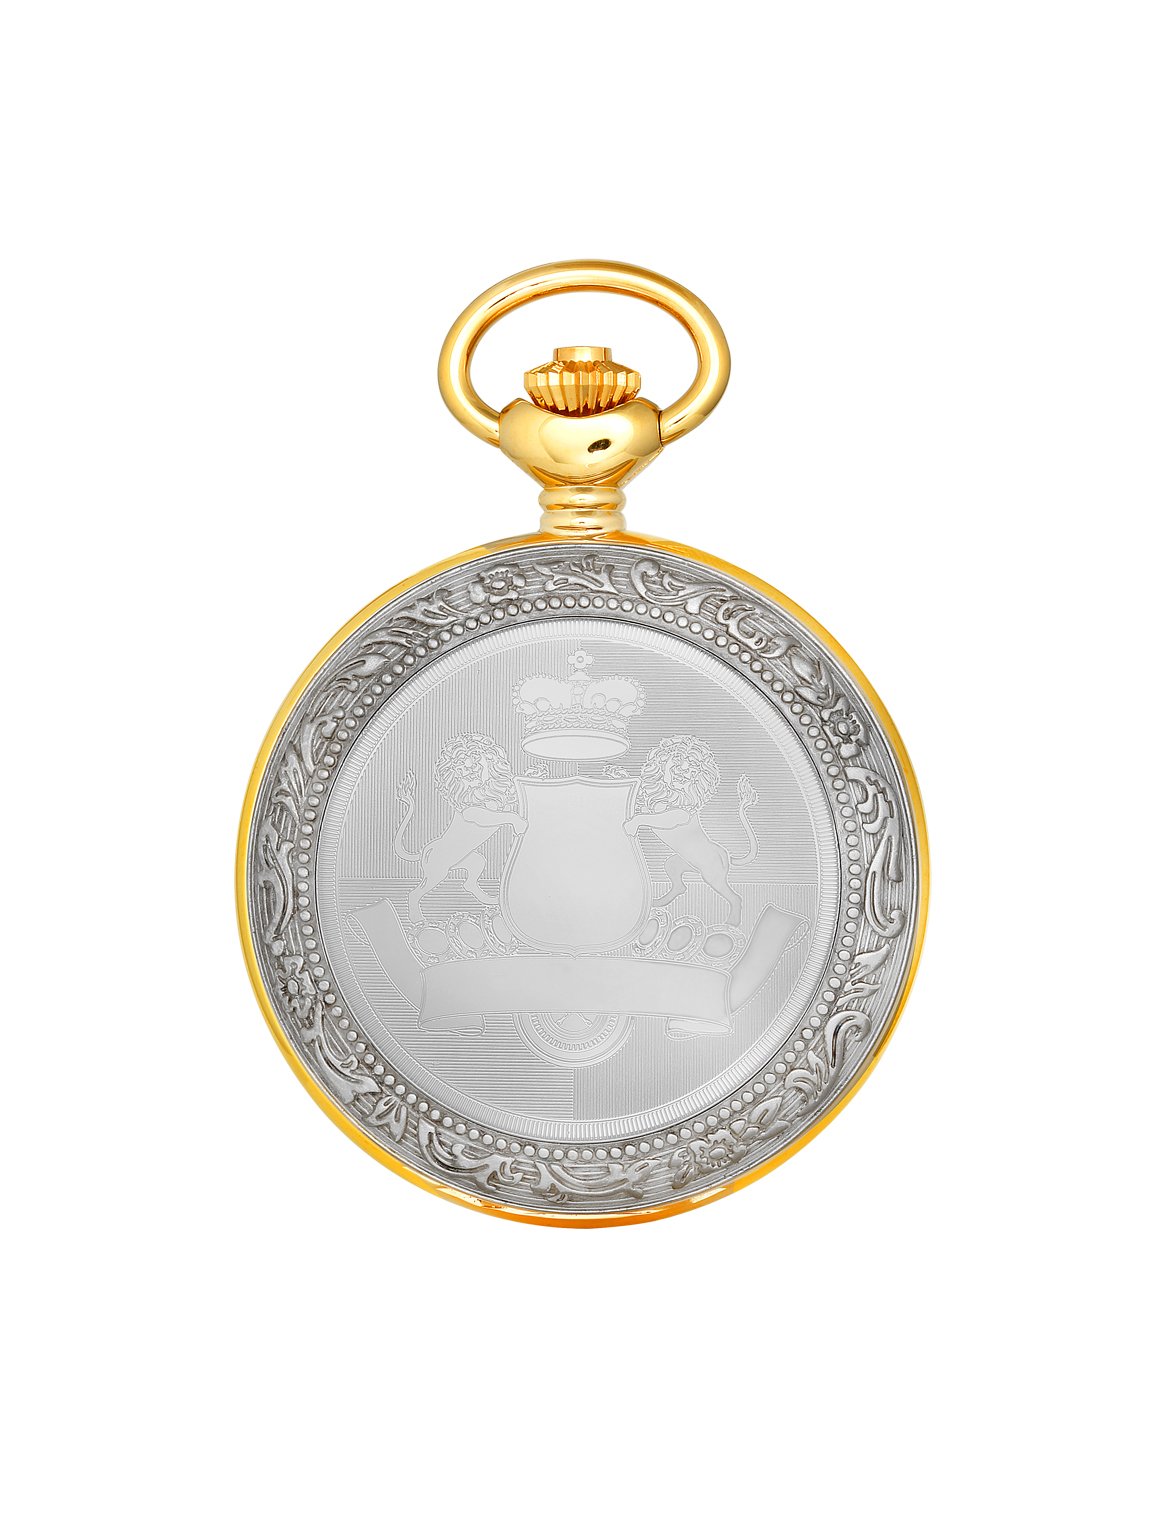 CHARLES-HUBERT PARIS Classic Collection Mechanical-Hand-Wind Pocket Watch (Model: DWA011)